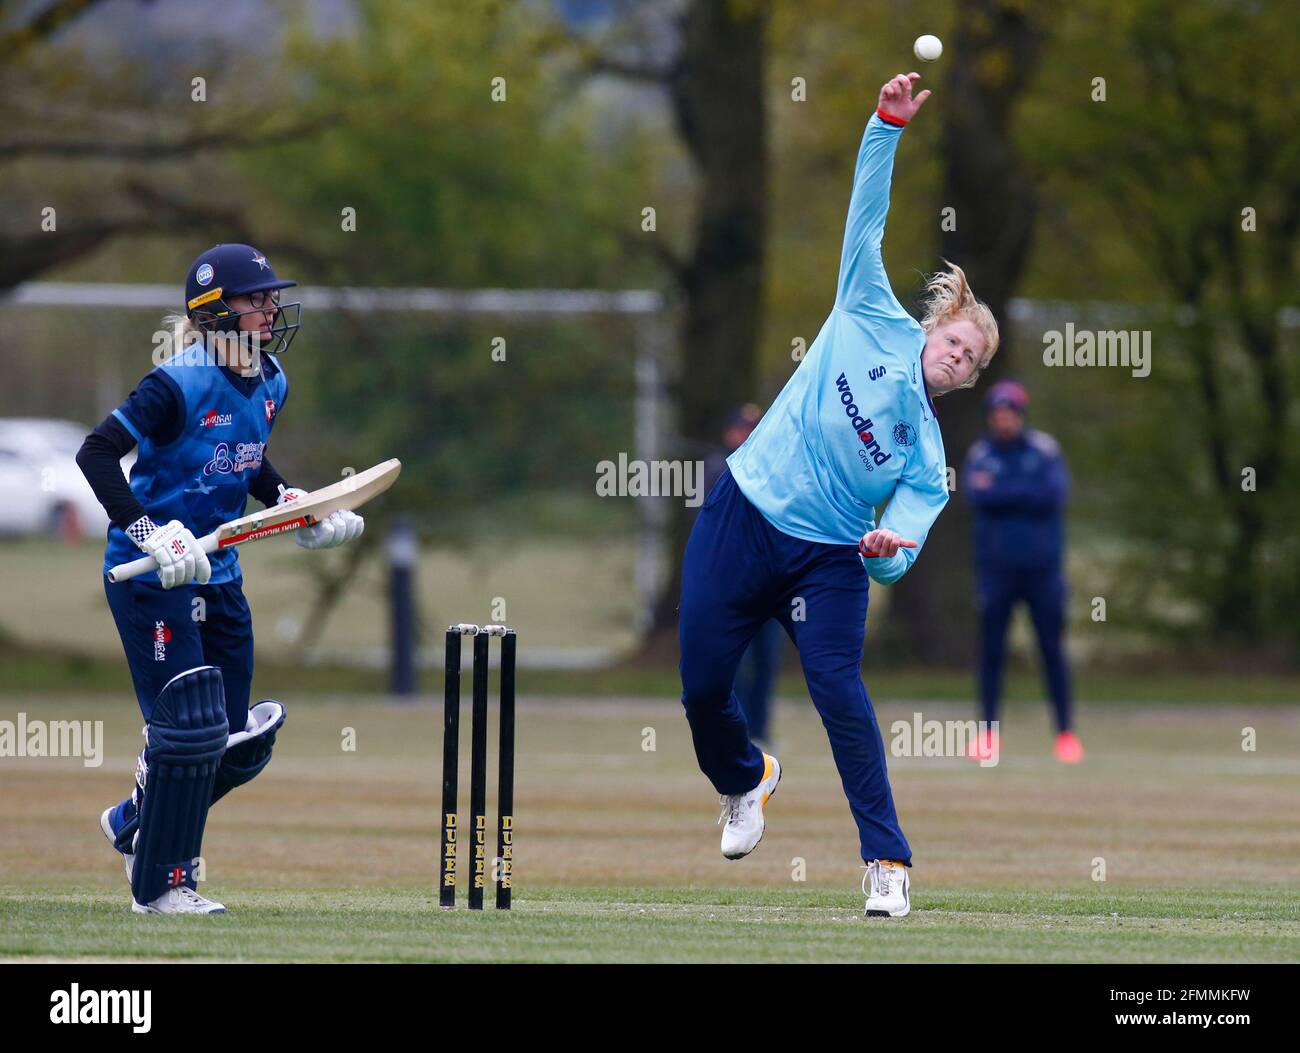 CHIGWELL, United Kingdom, MAY 01: Alice Macleod of Essex Womenduring Women London Championship between Essex CCC and Kent CCC at Chigwell School, Chig Stock Photo